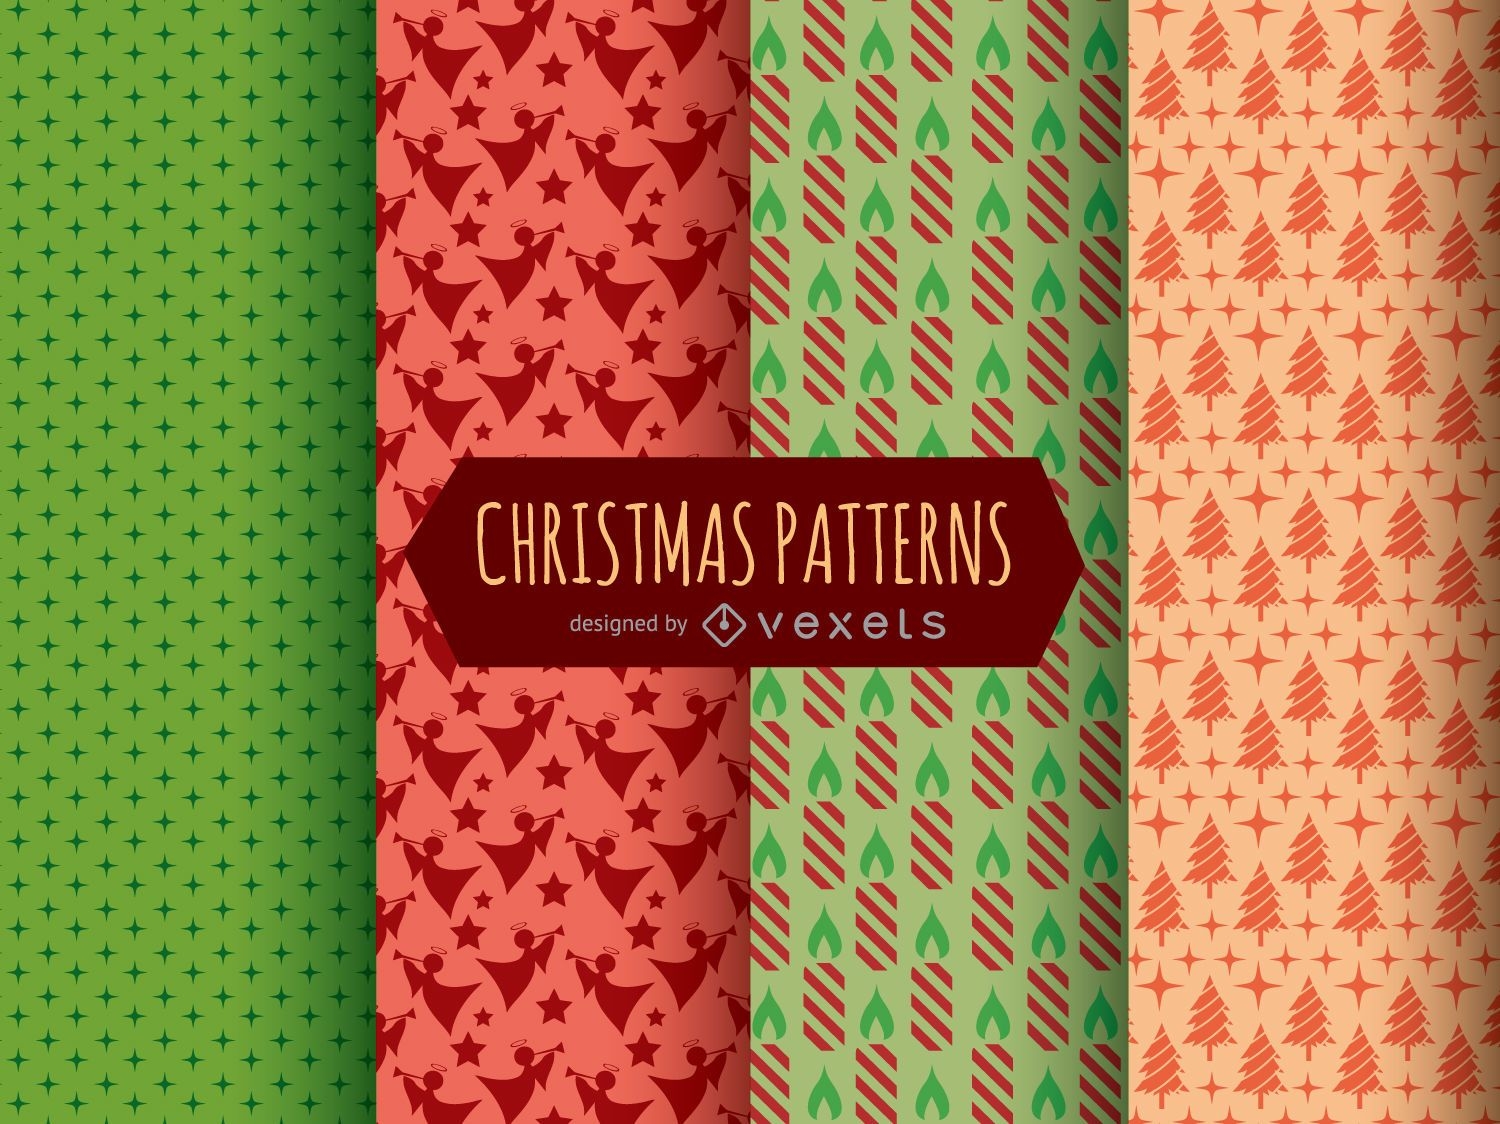 Christmas Patterns and textures